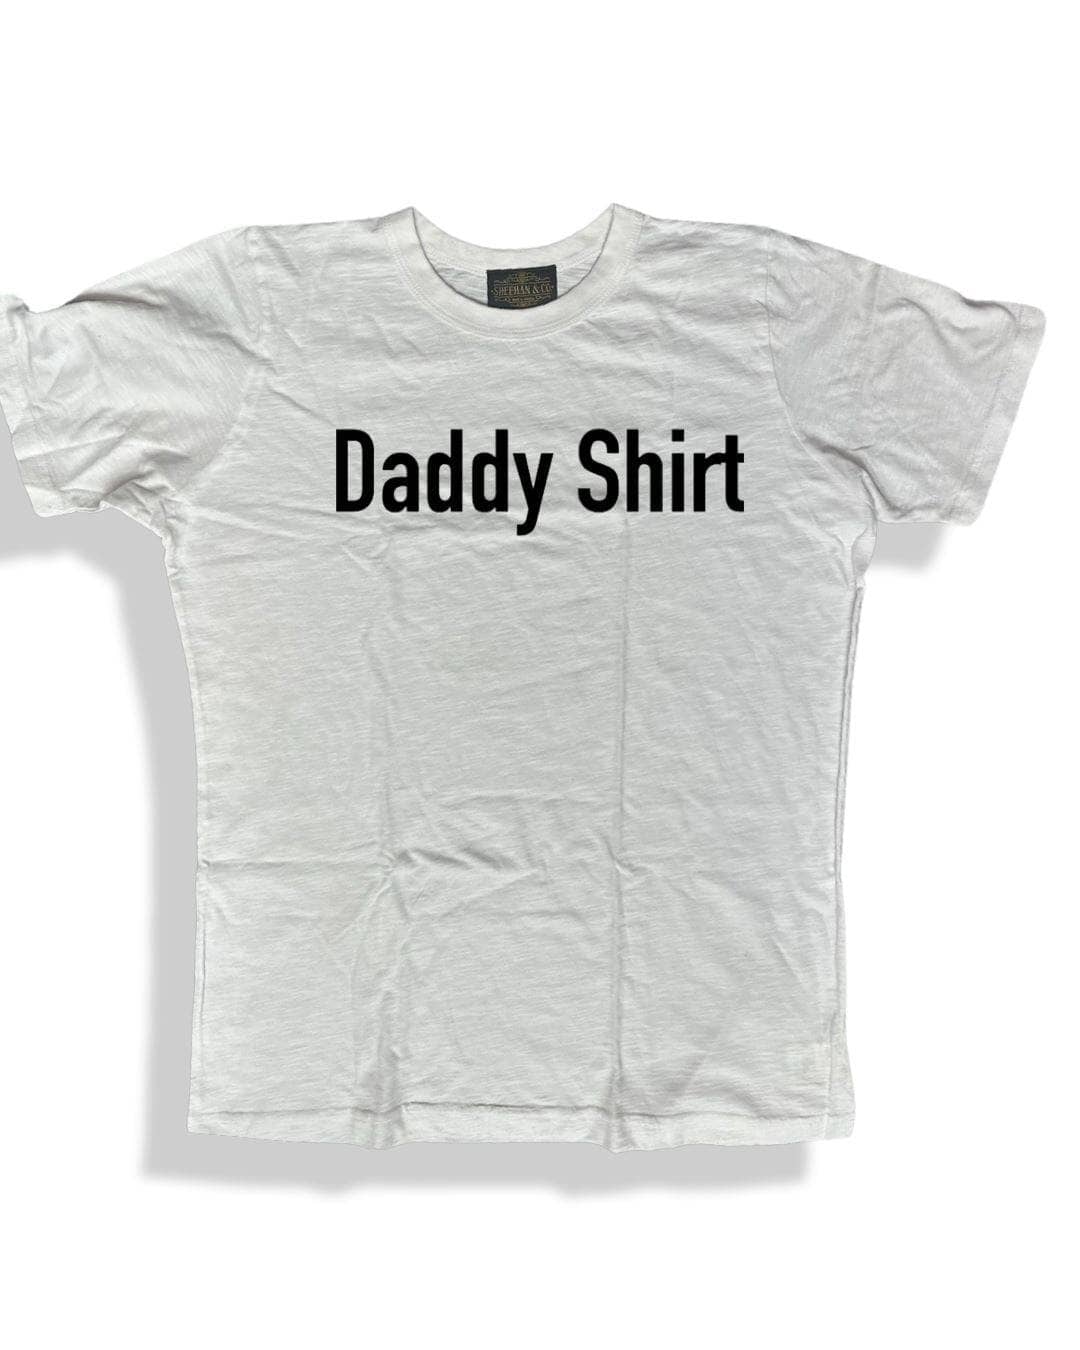 Daddy's Shirt Statement Tee - Sheehan and Co.